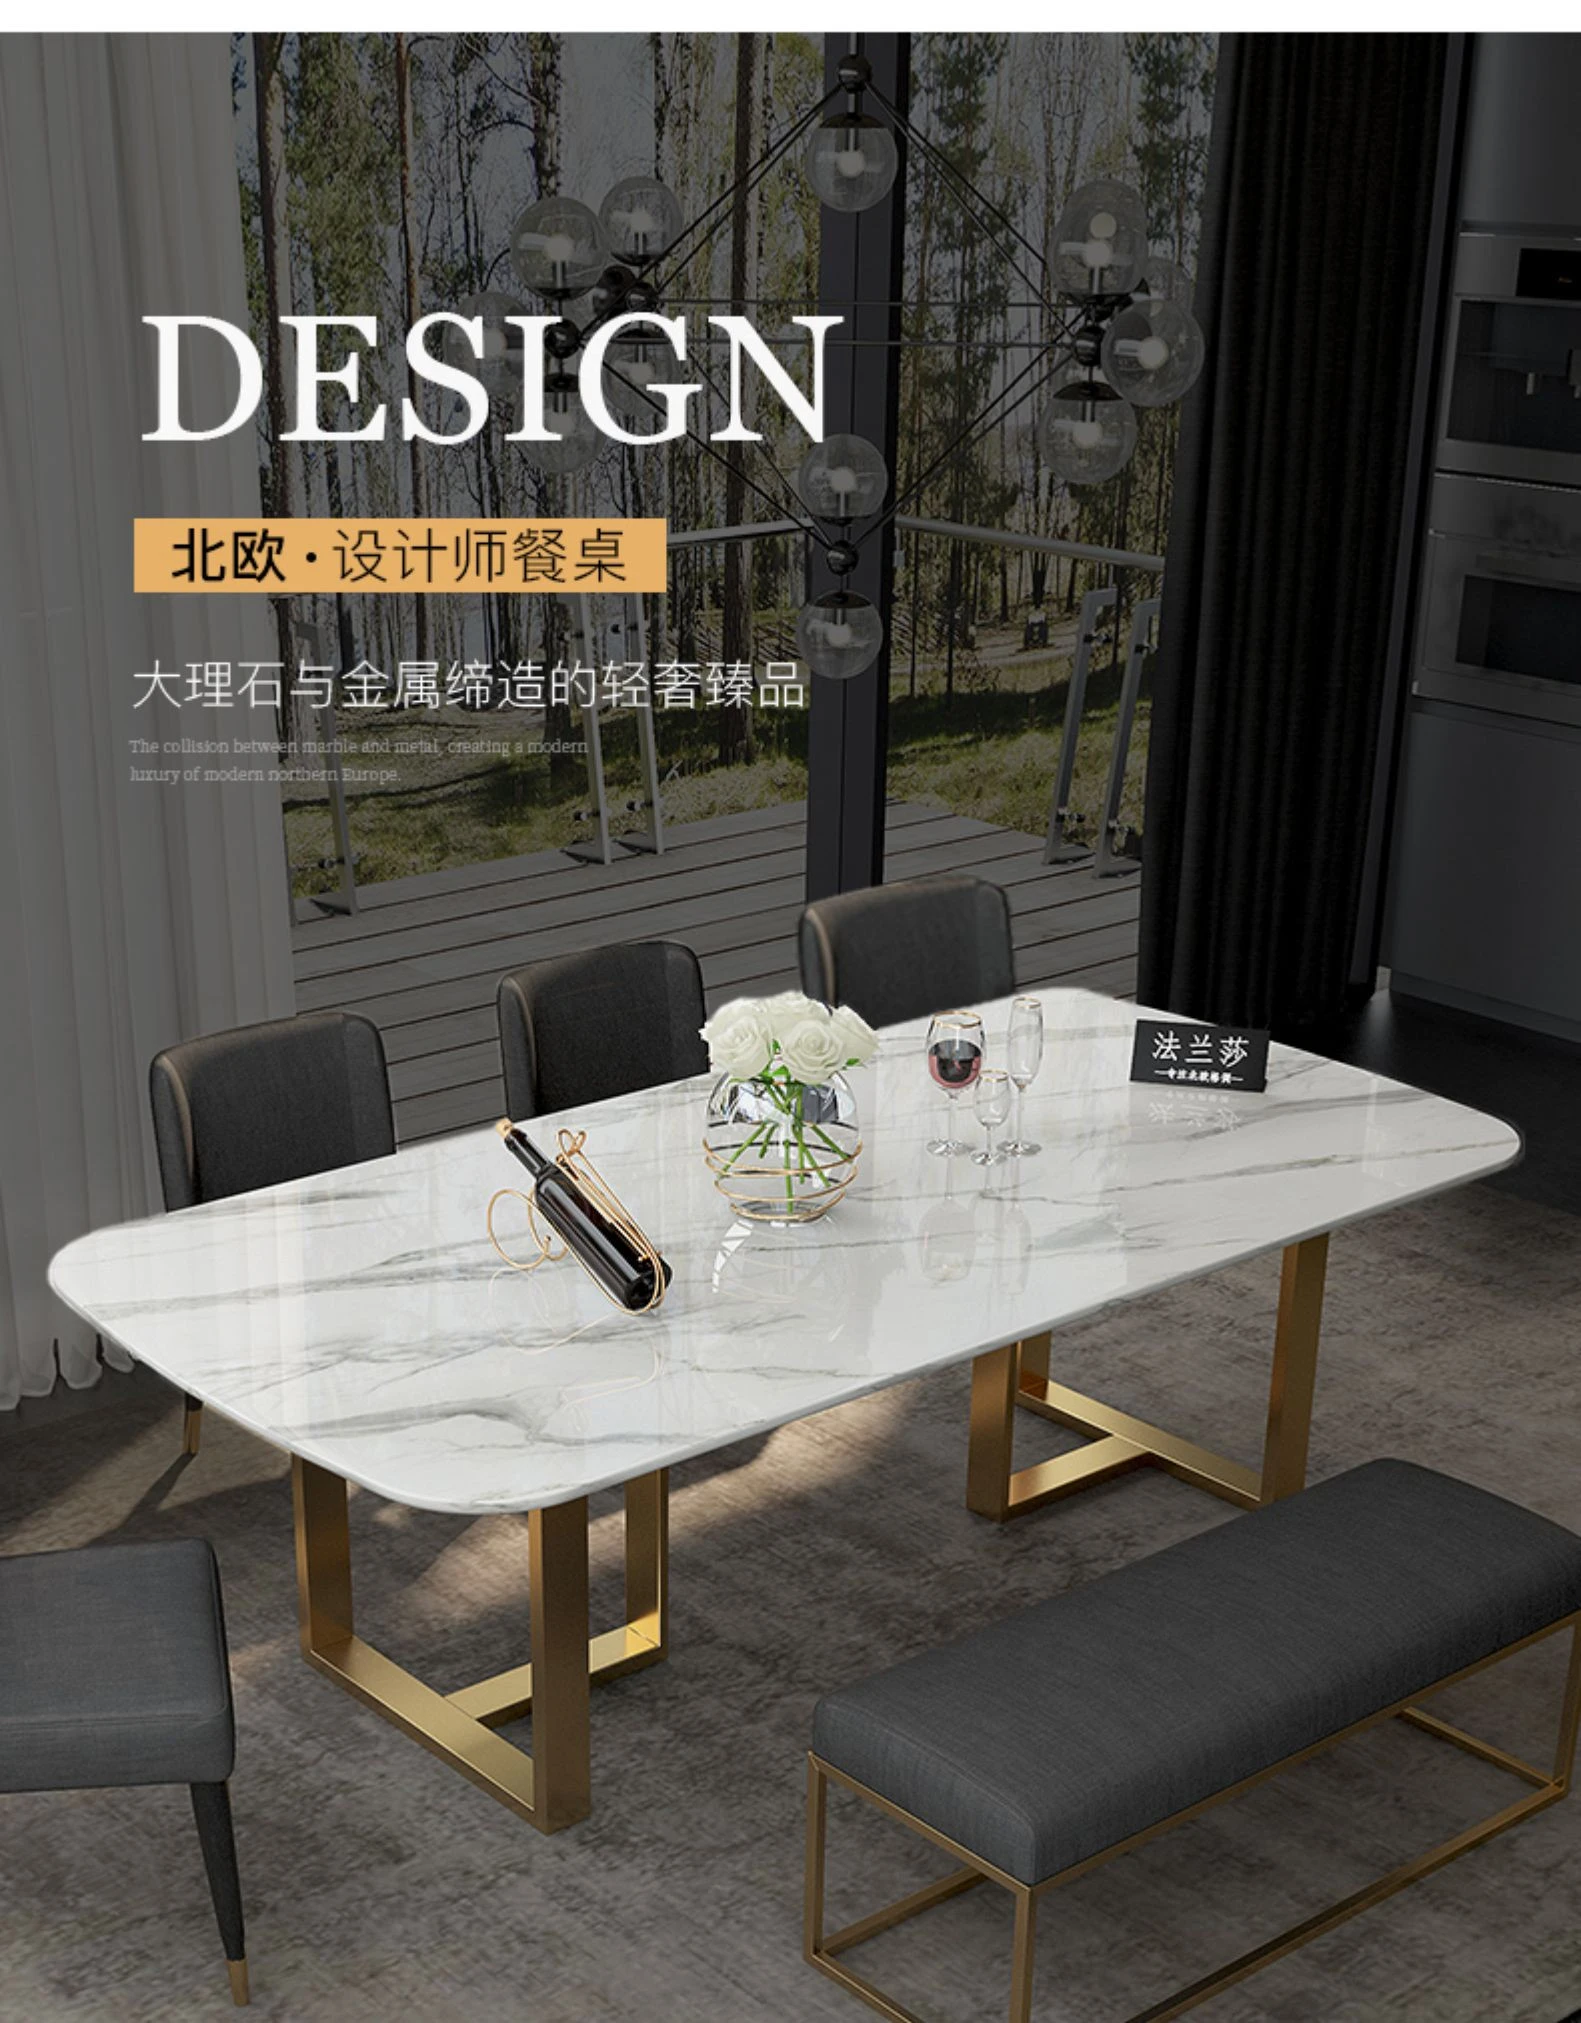 Factory Supply Living Room Furniture Modern Design Luxury Dining Table Chairs Sets